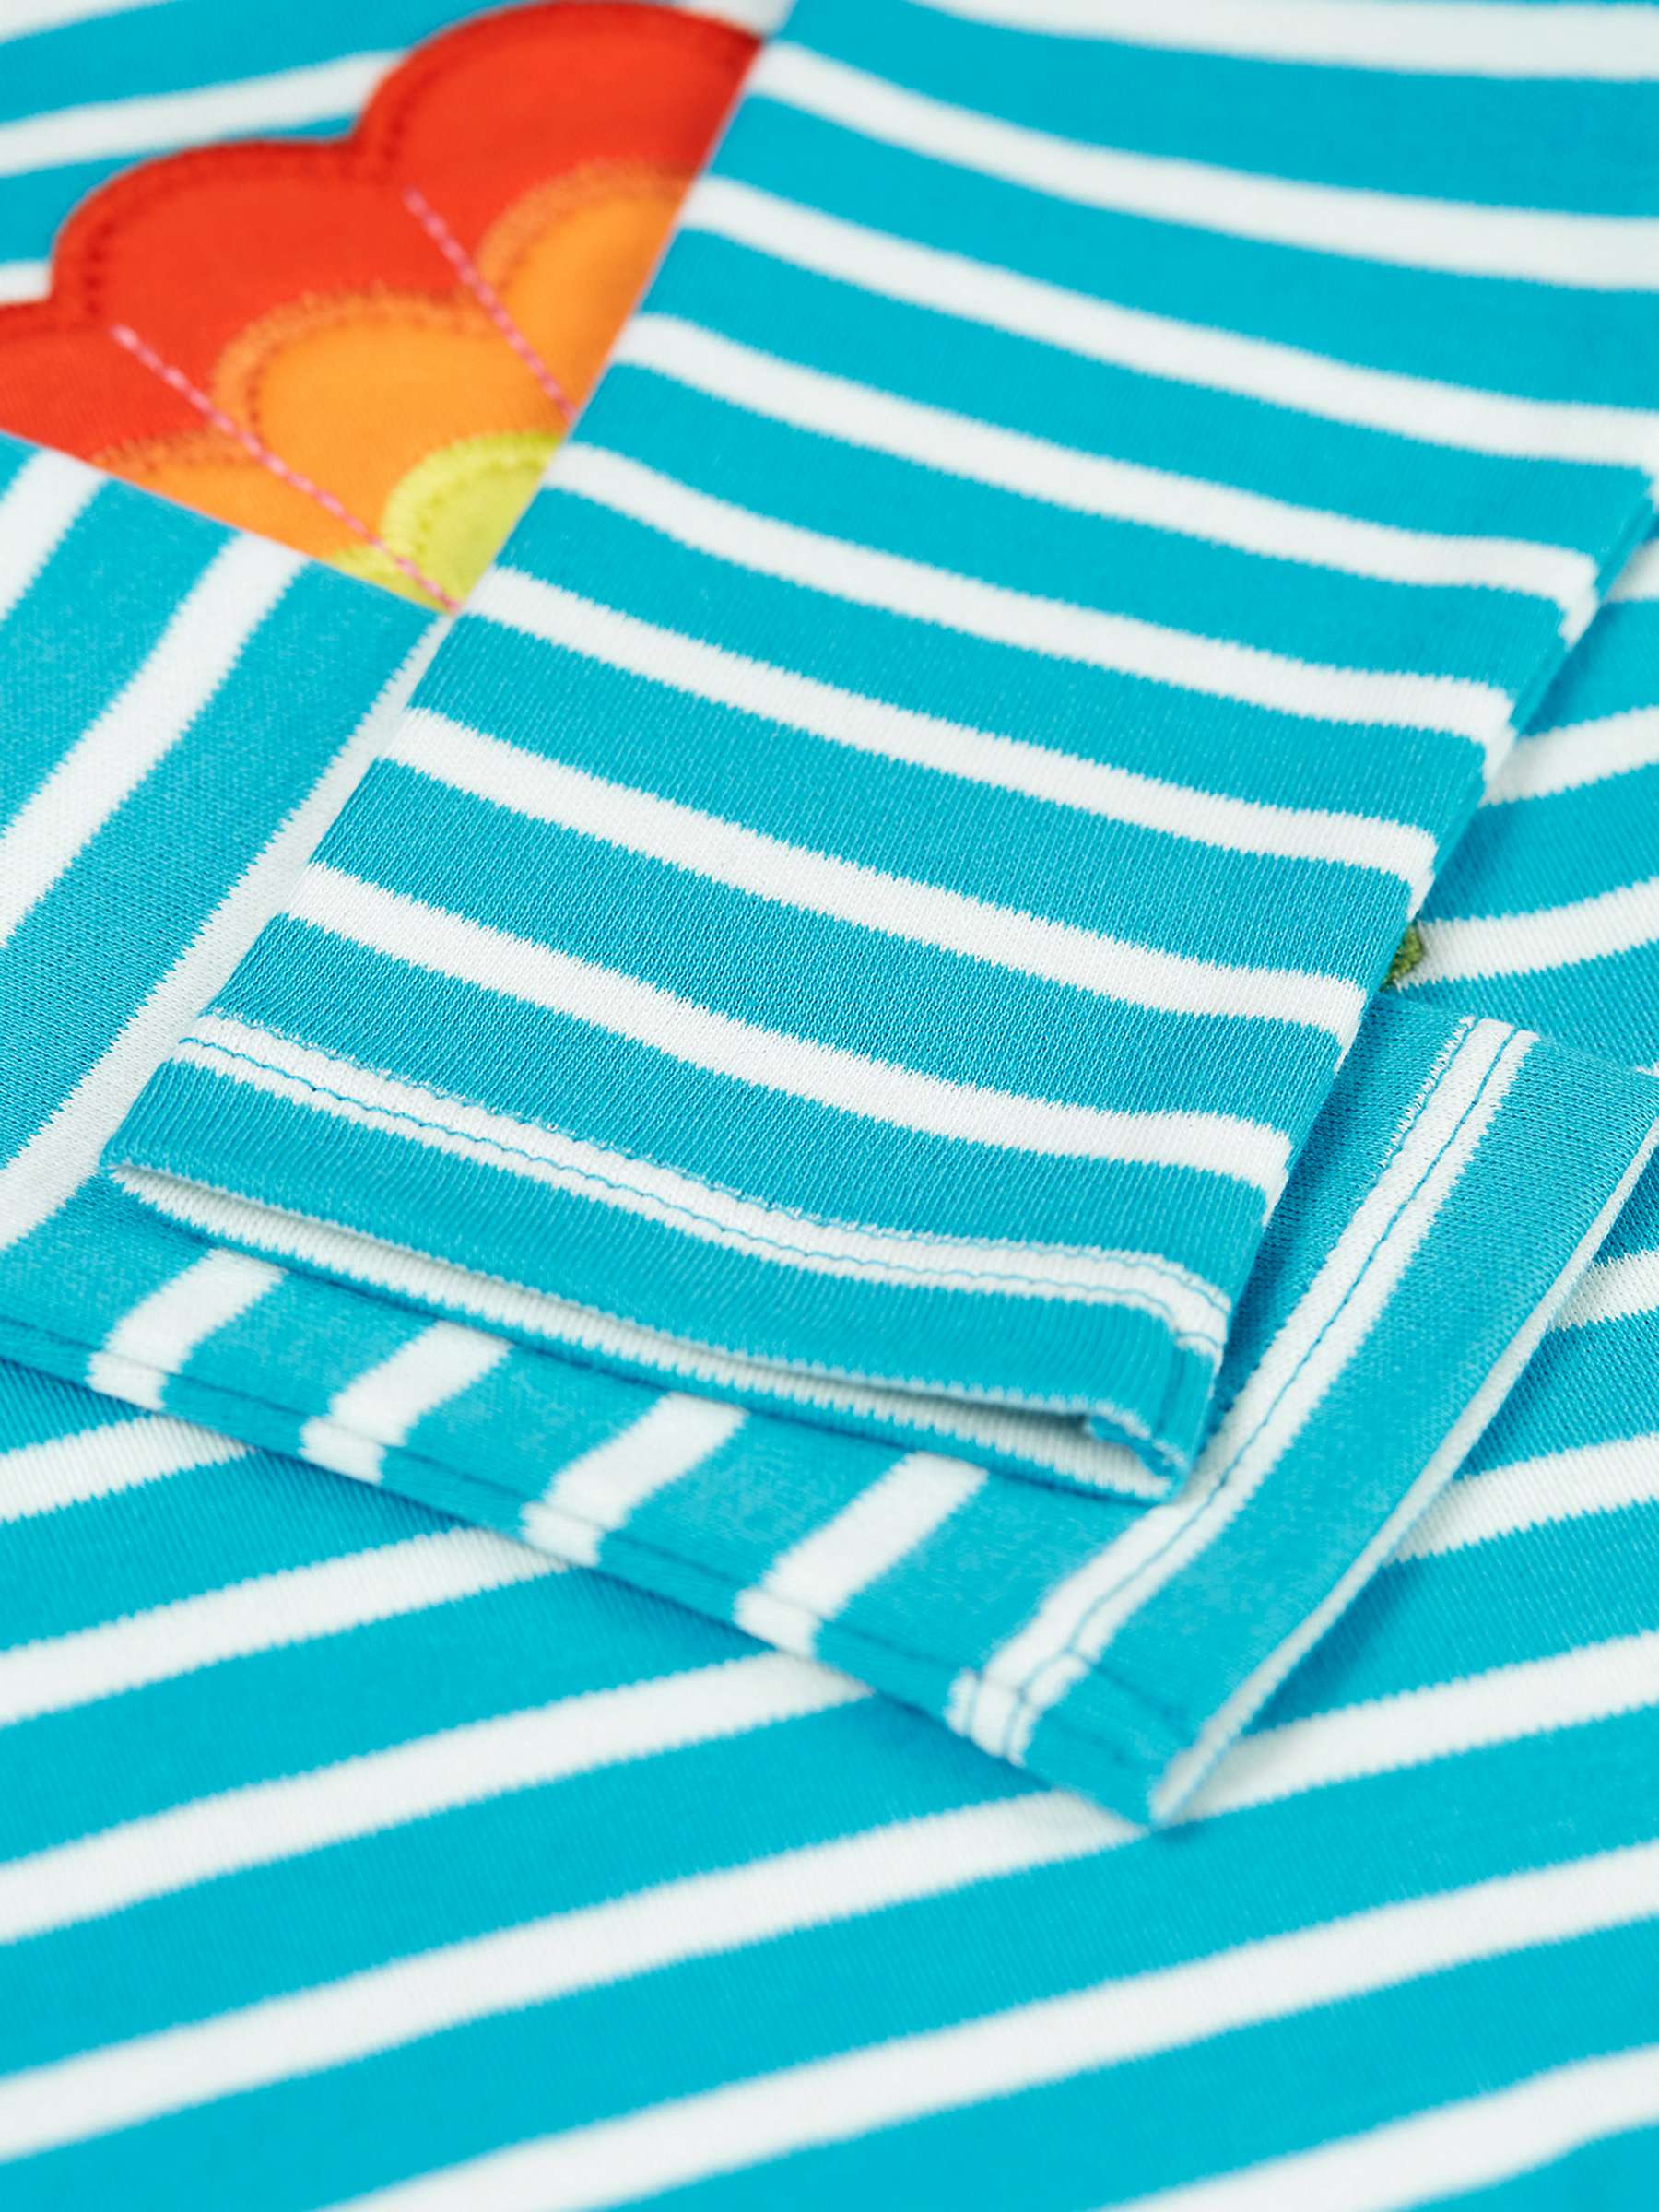 Buy Frugi Baby Organic Cotton Bobby Shell Applique Stripe Top, Tropical Sea Online at johnlewis.com